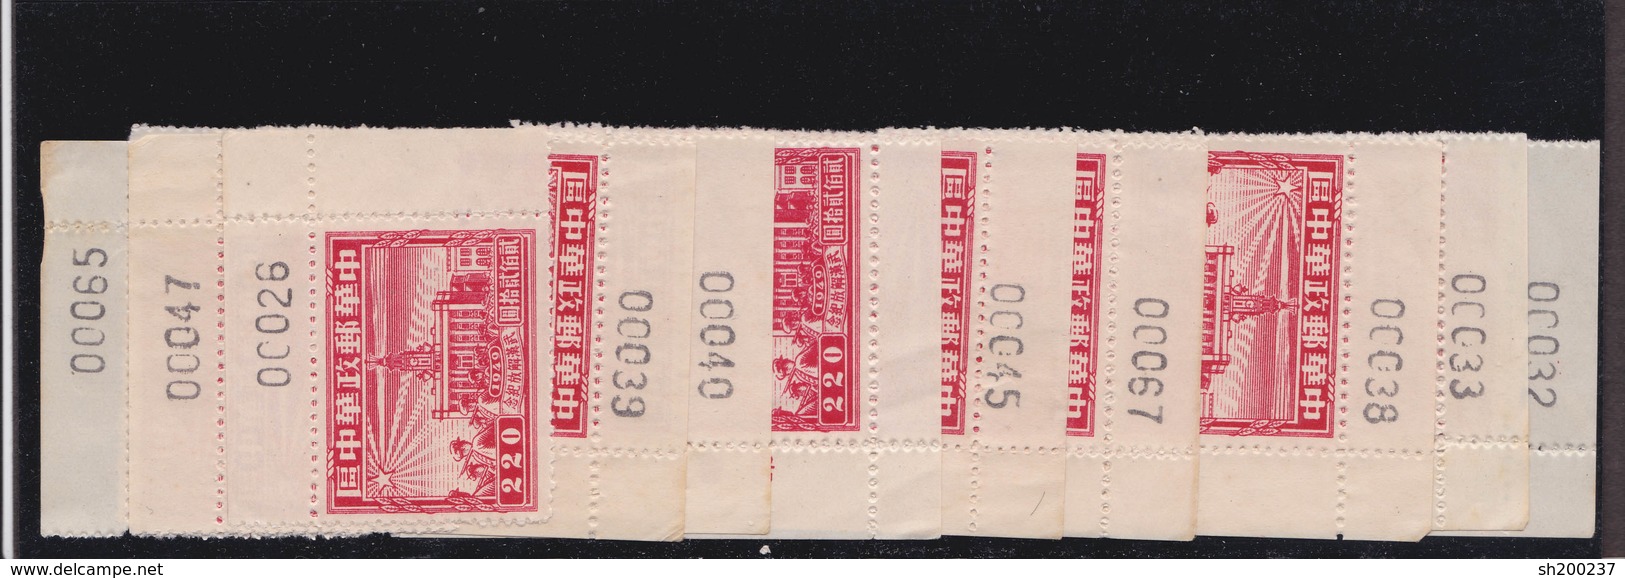 1949 Lib. Of Hankow LCC87 Corner Number - Chine Centrale 1948-49